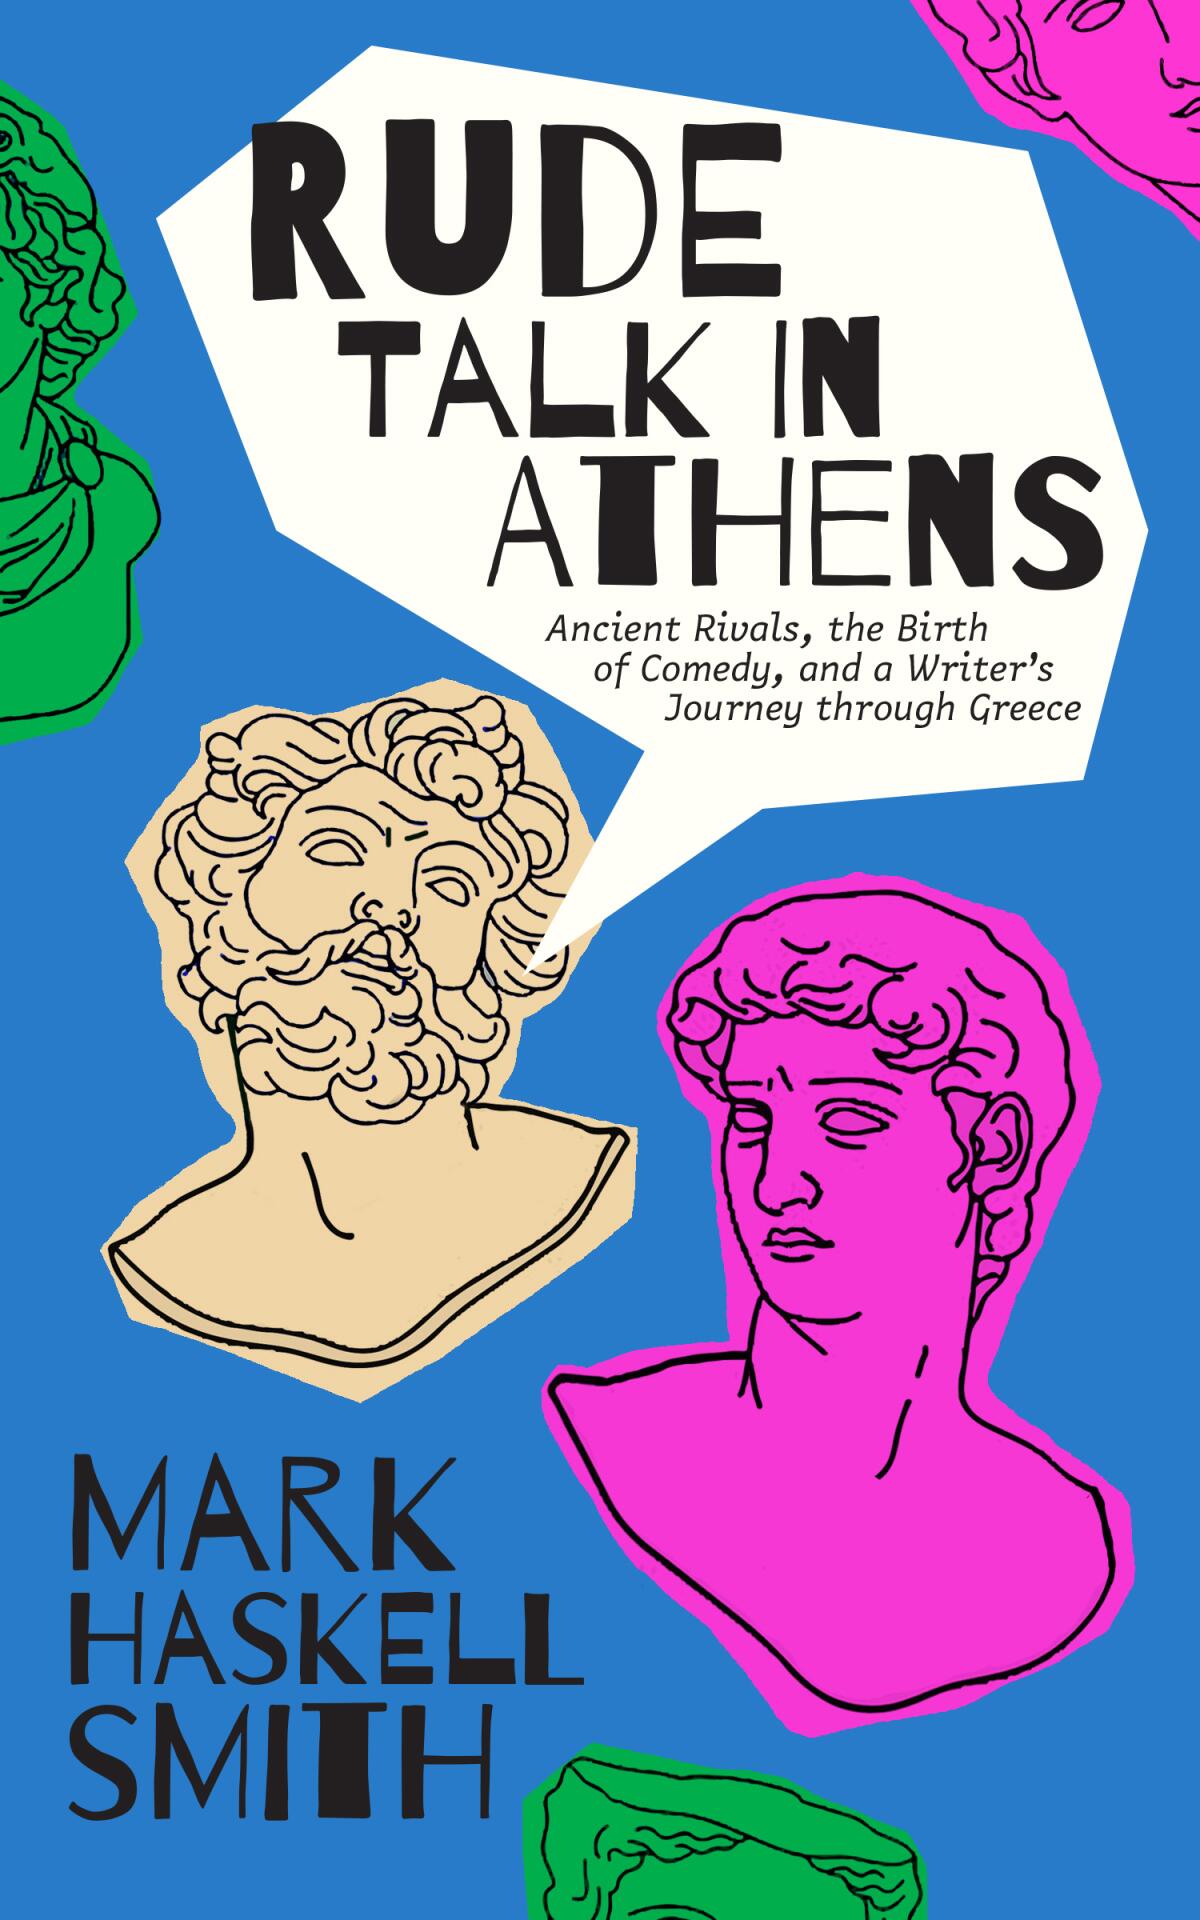 "Rude Talk in Athens," by Mark Haskell Smith